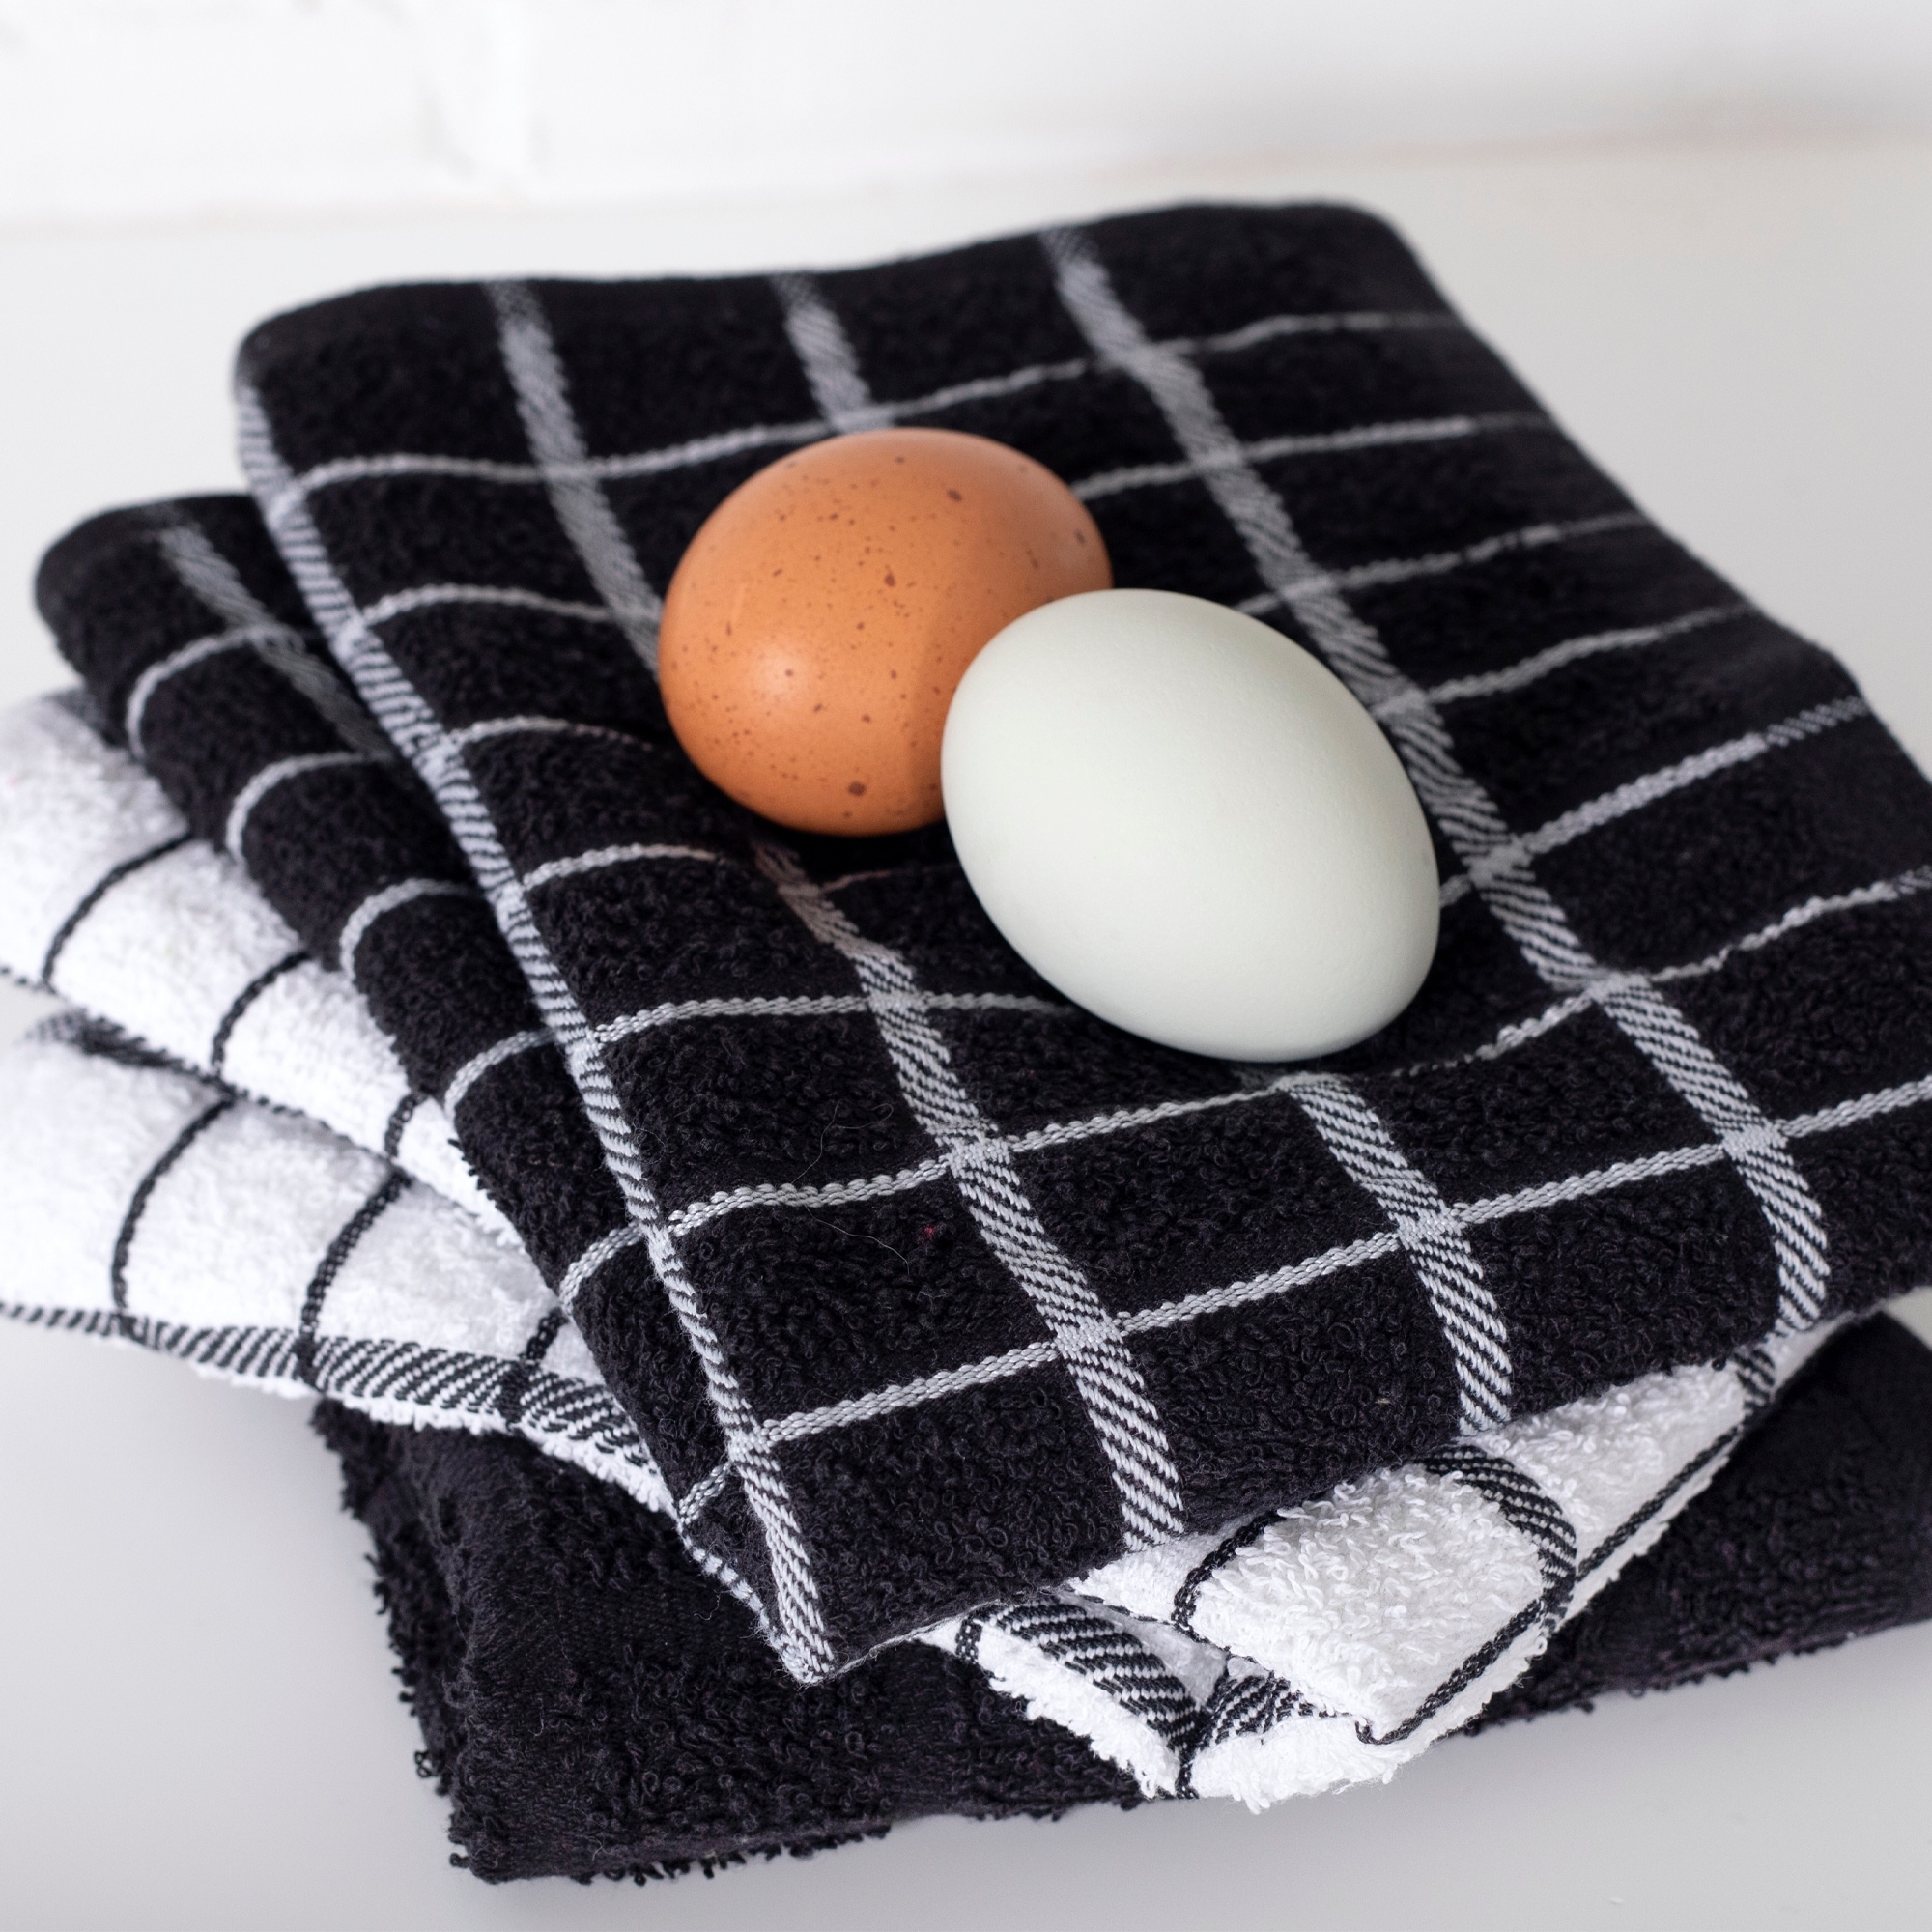 https://ak1.ostkcdn.com/images/products/is/images/direct/87055f6c4910c000463c9ed65467ac2404f462fc/RITZ-Terry-Check-Kitchen-Towel%2C-Set-of-3.jpg